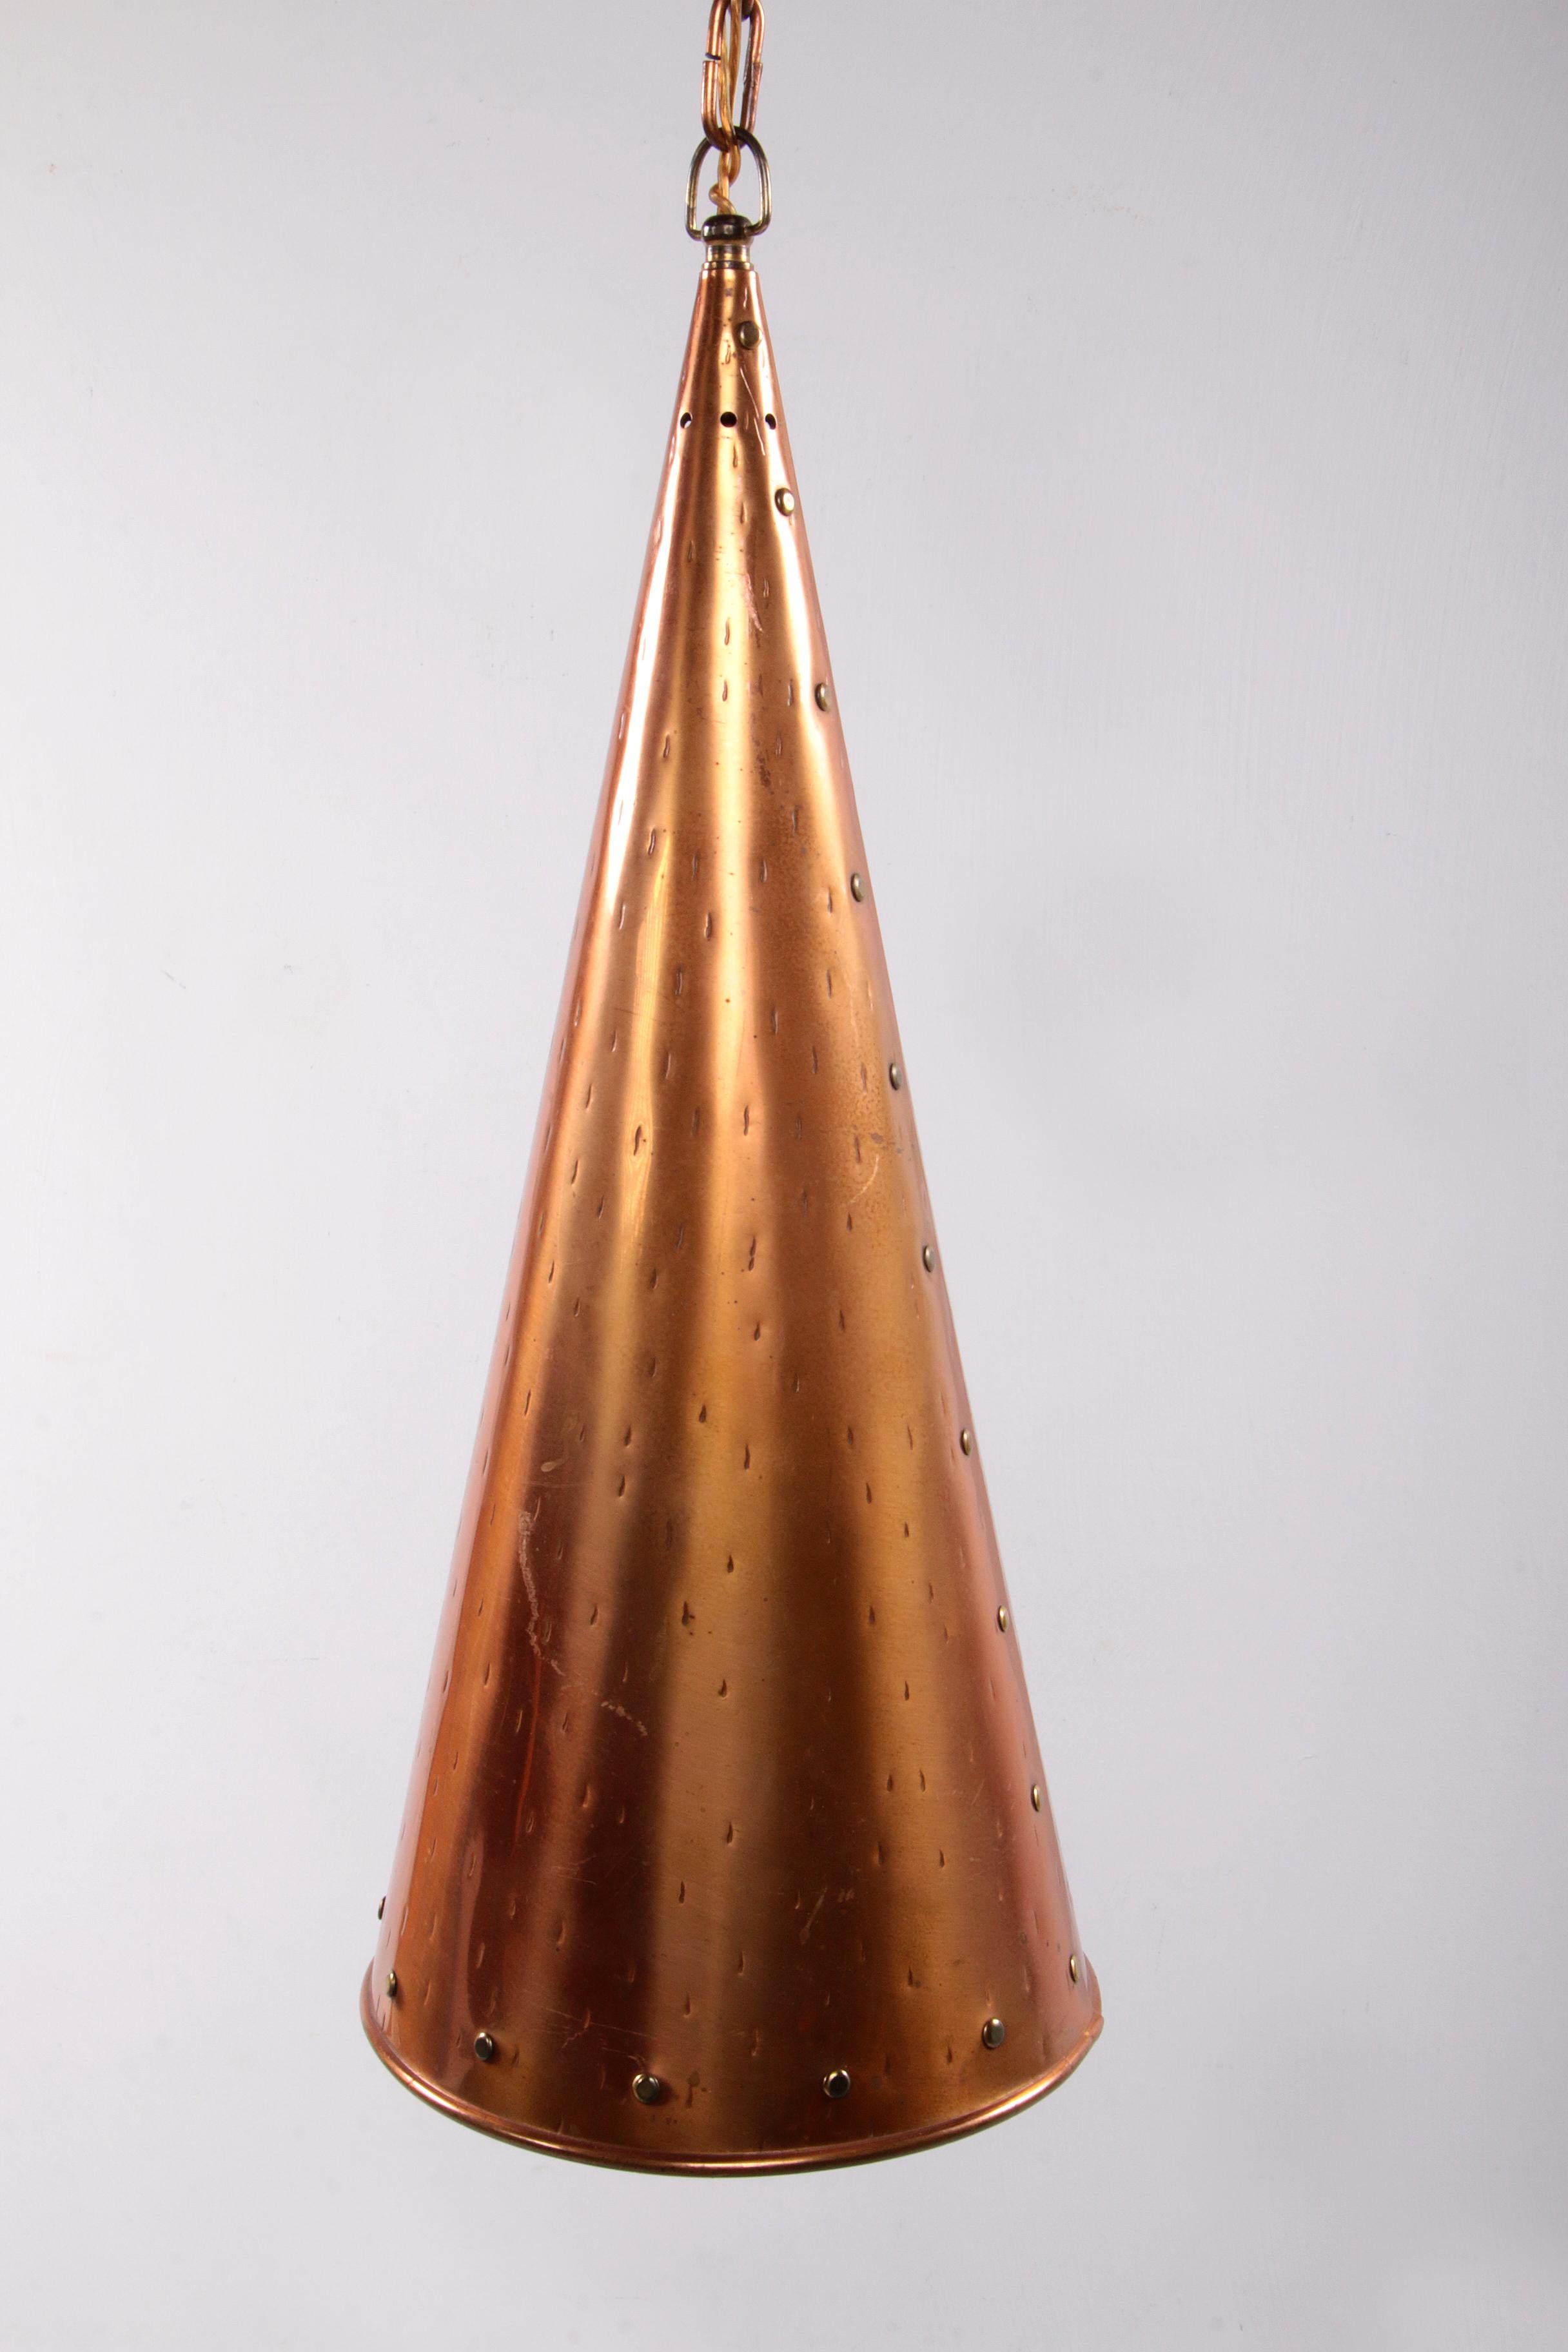 Scandinavian Modern Danish hand-hammered copper hanging lamp by E.S Horn Aalestrup, 1950s For Sale